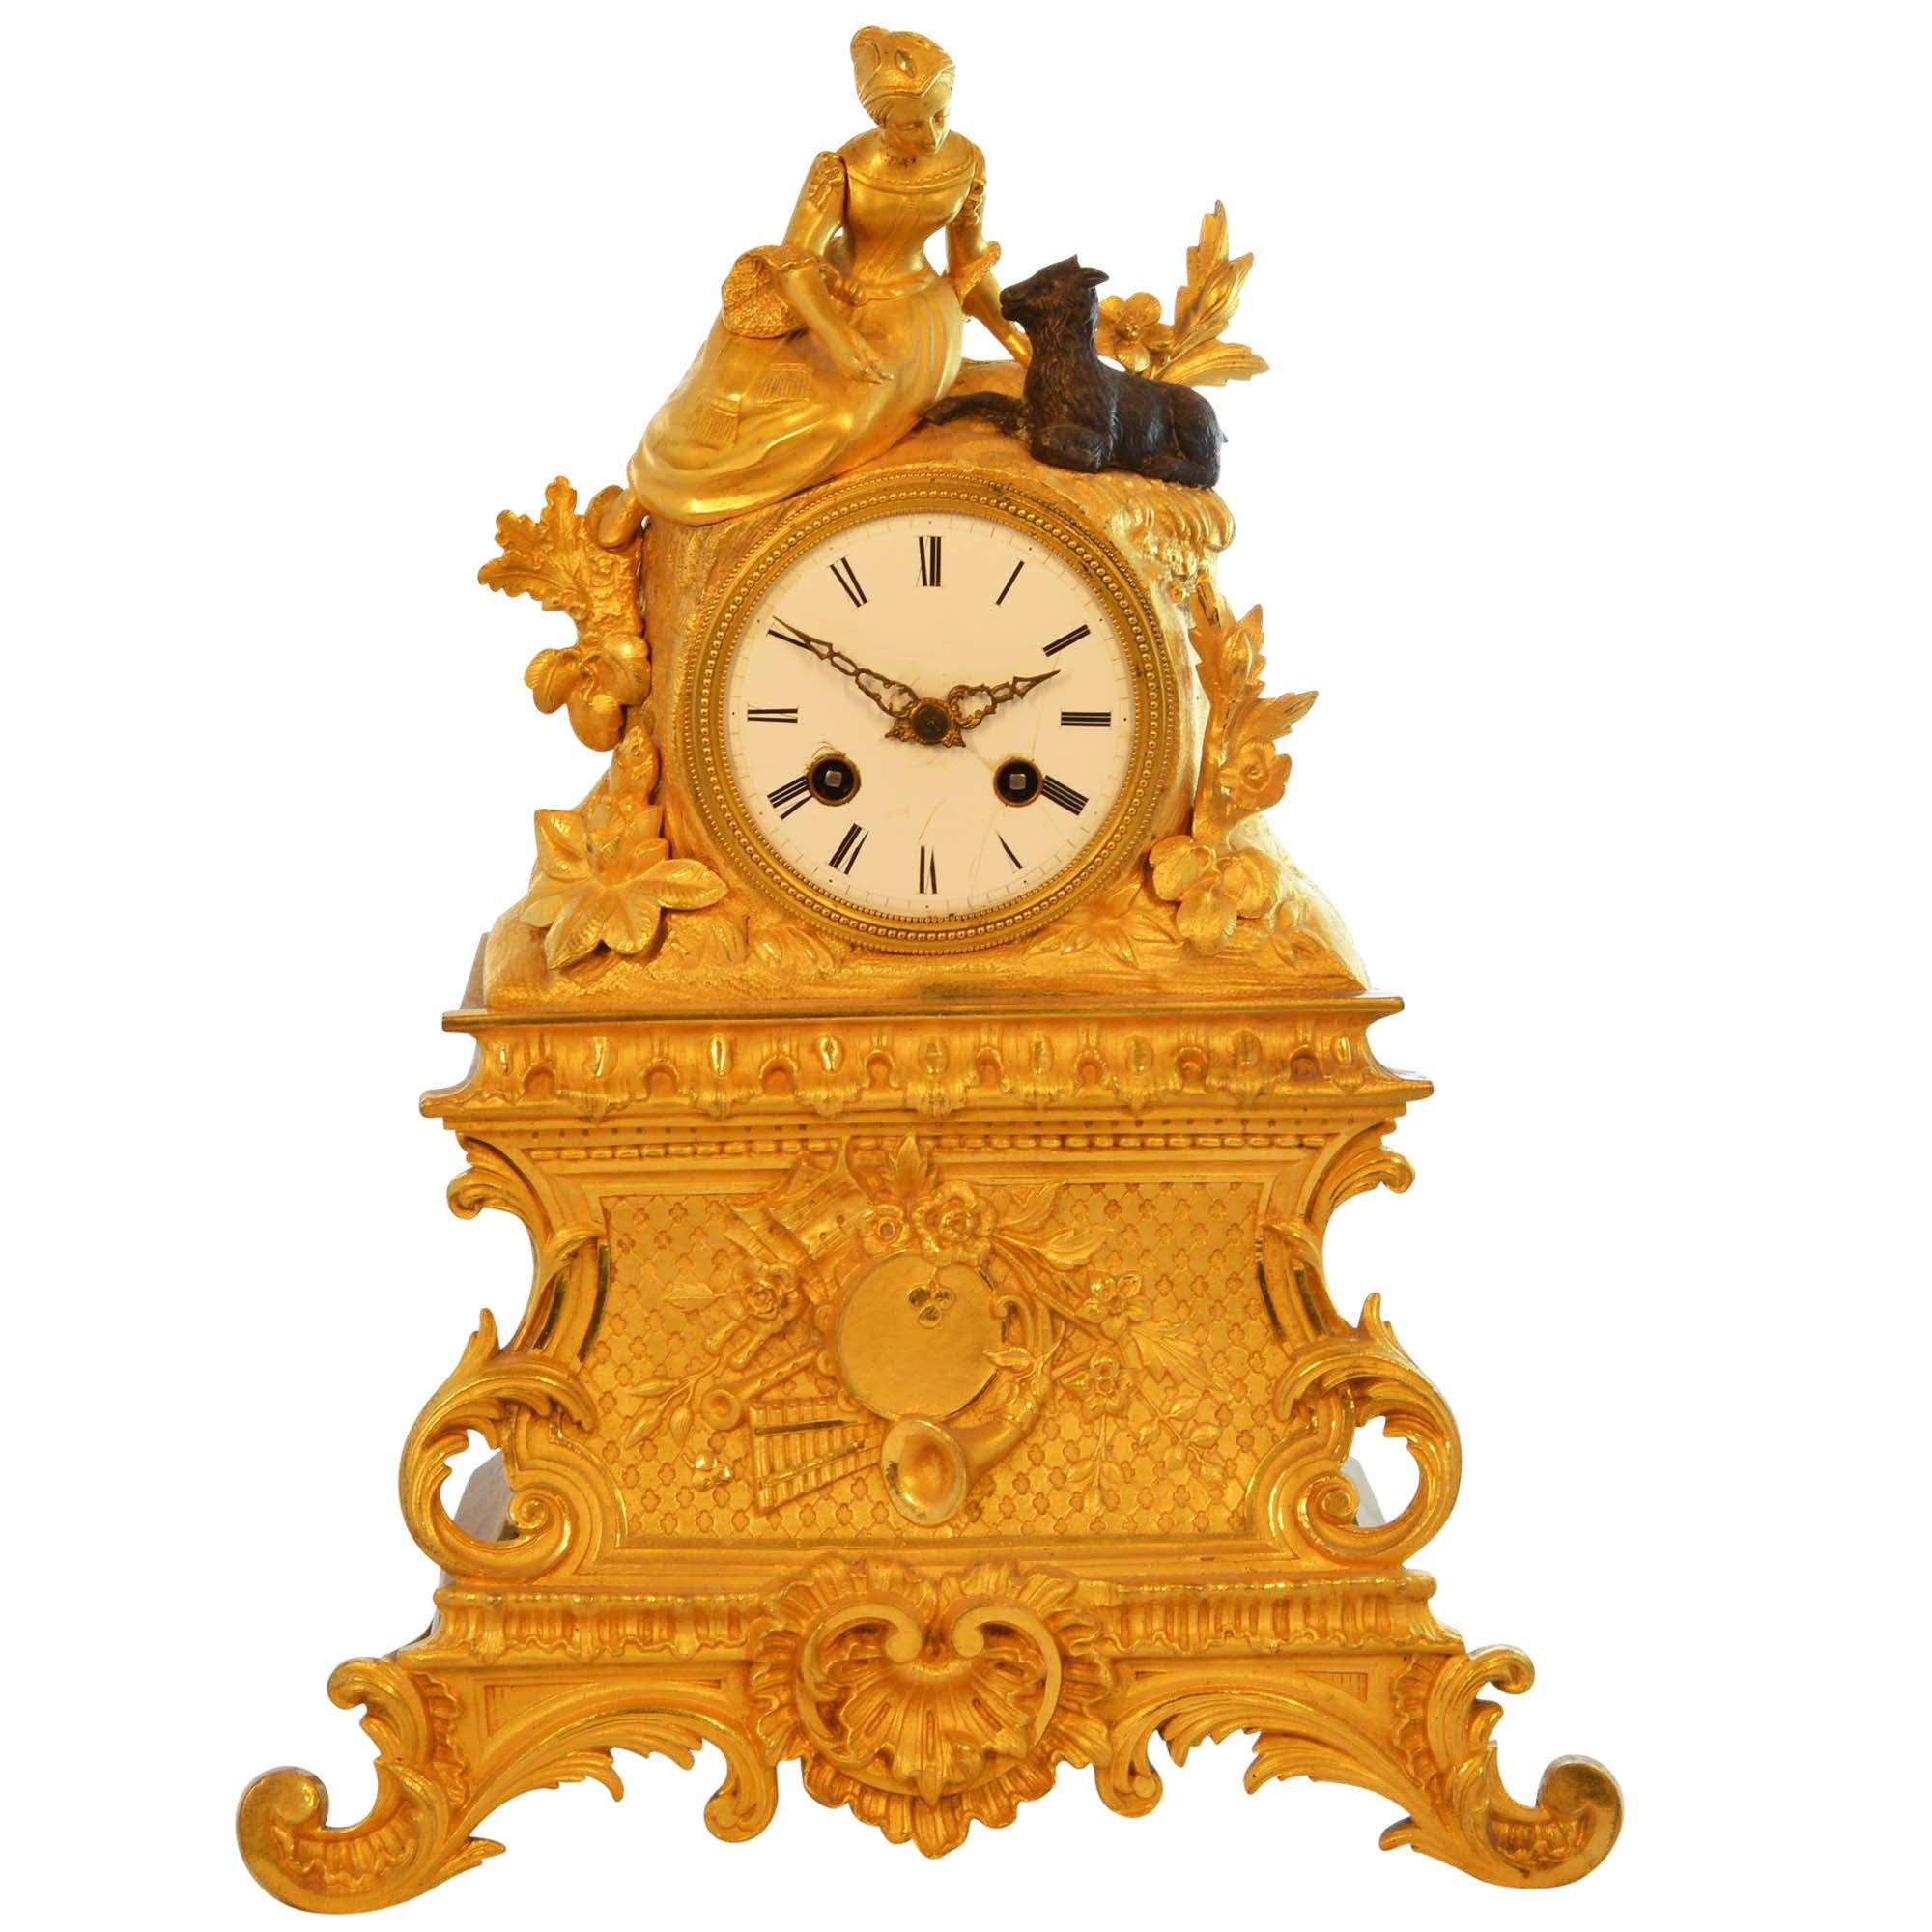 Antique 19th Century Gilded Mantle Desk Clock with Girl and Goat In Good Condition For Sale In Pataskala, OH